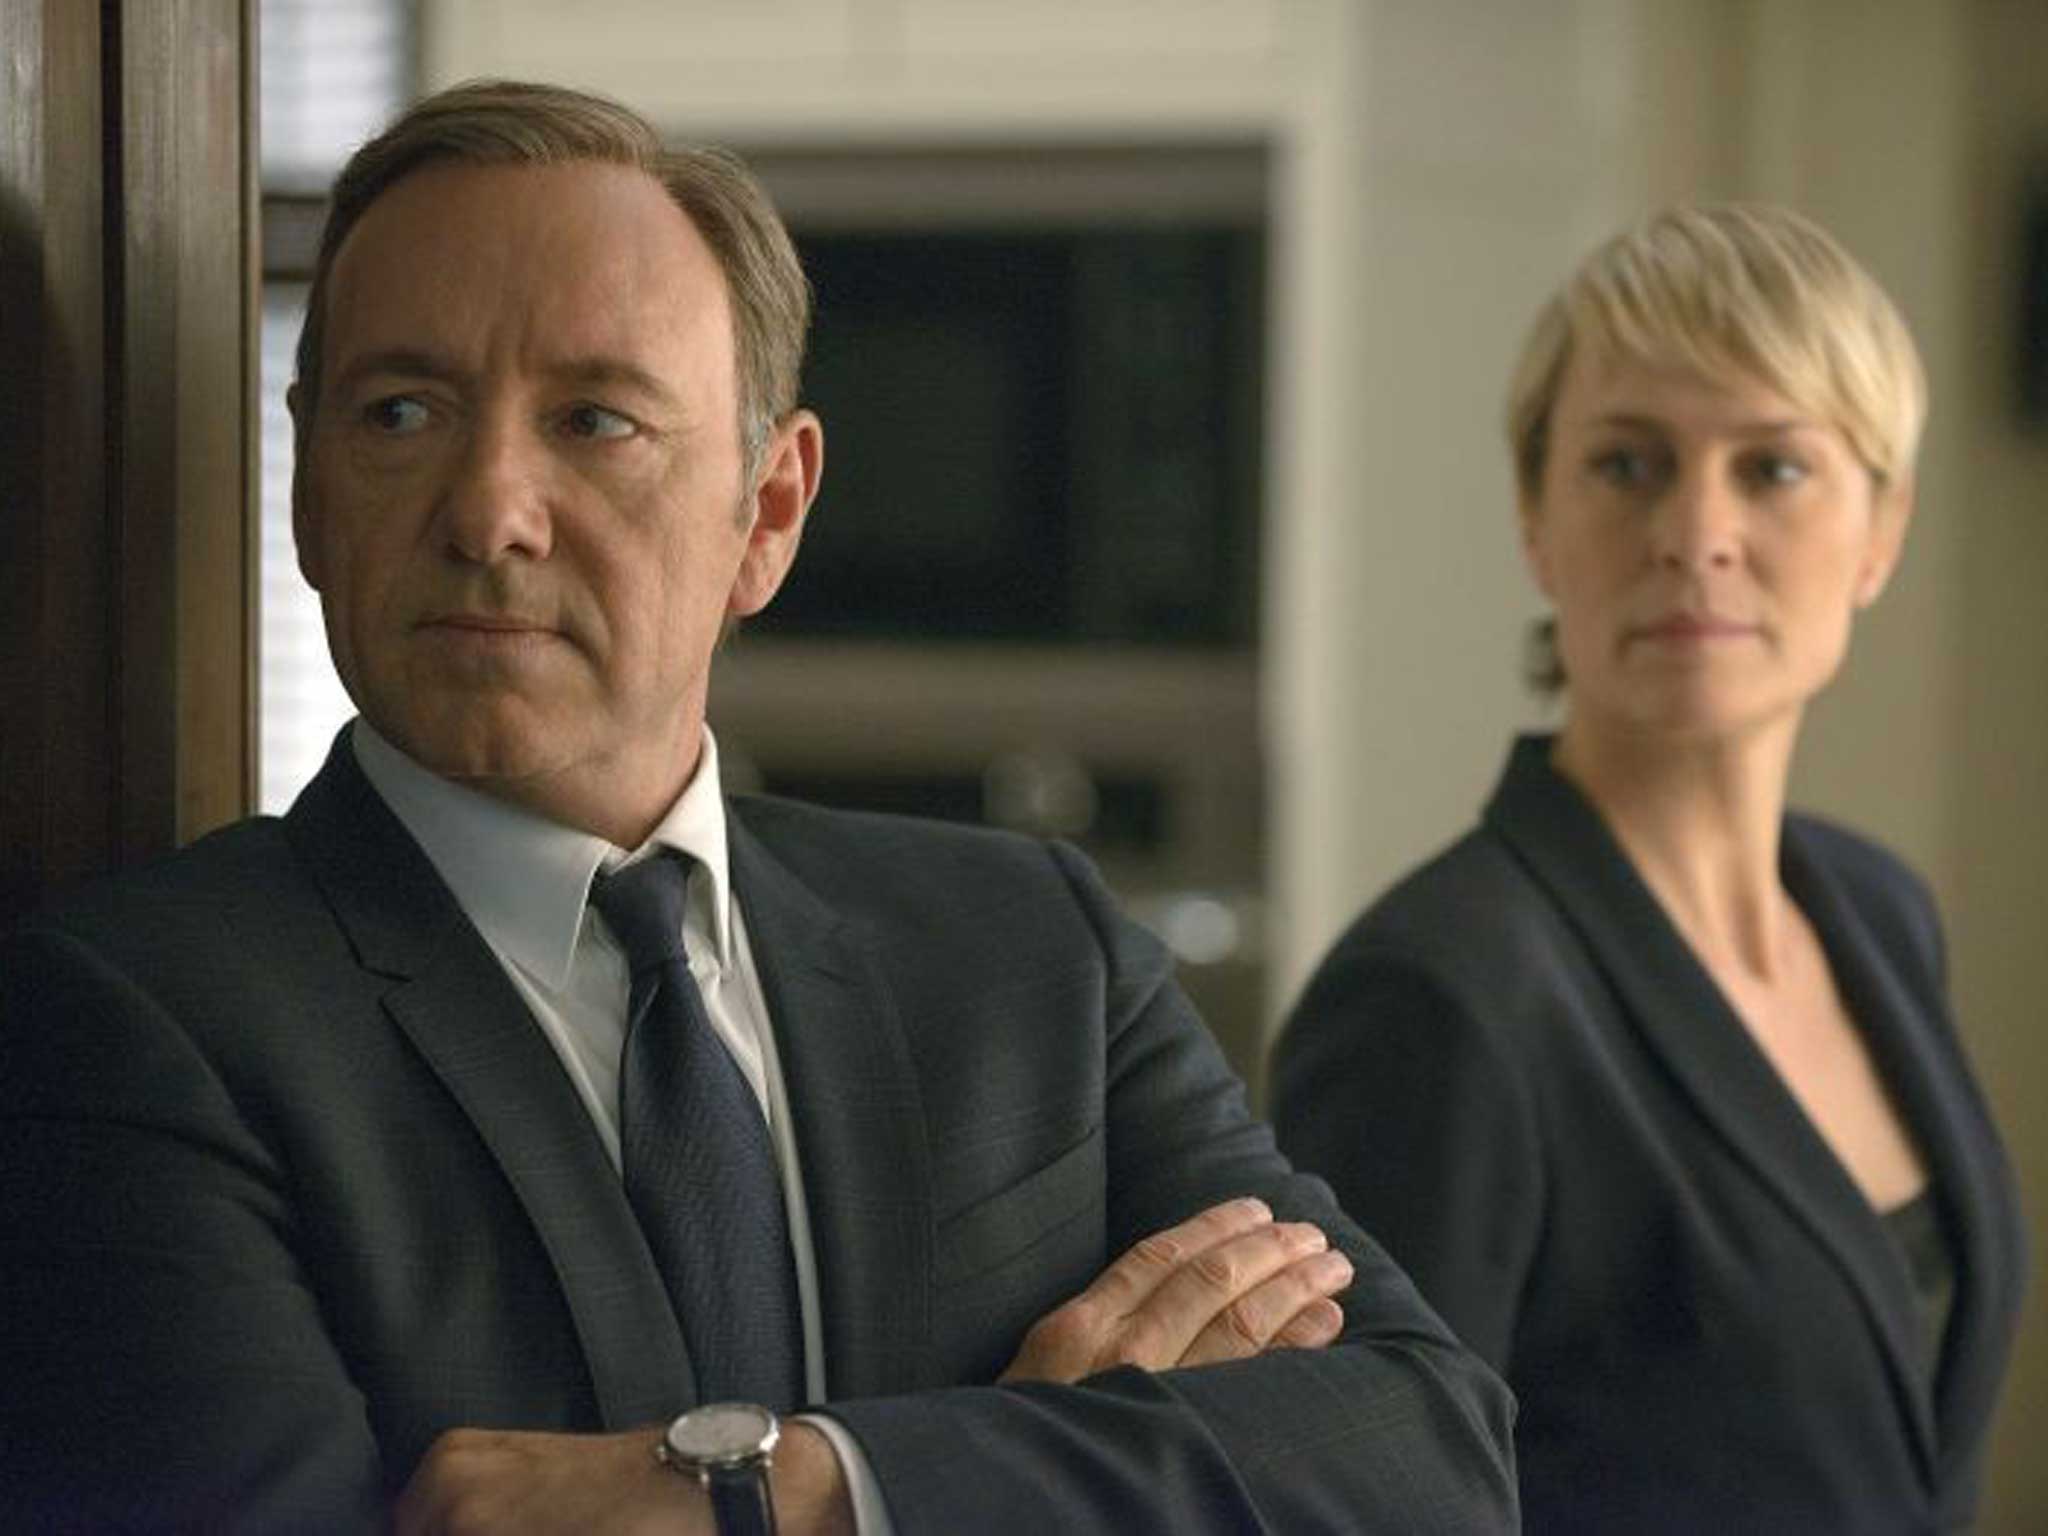 Power play: Kevin Spacey and Robin Wright in House of Cards